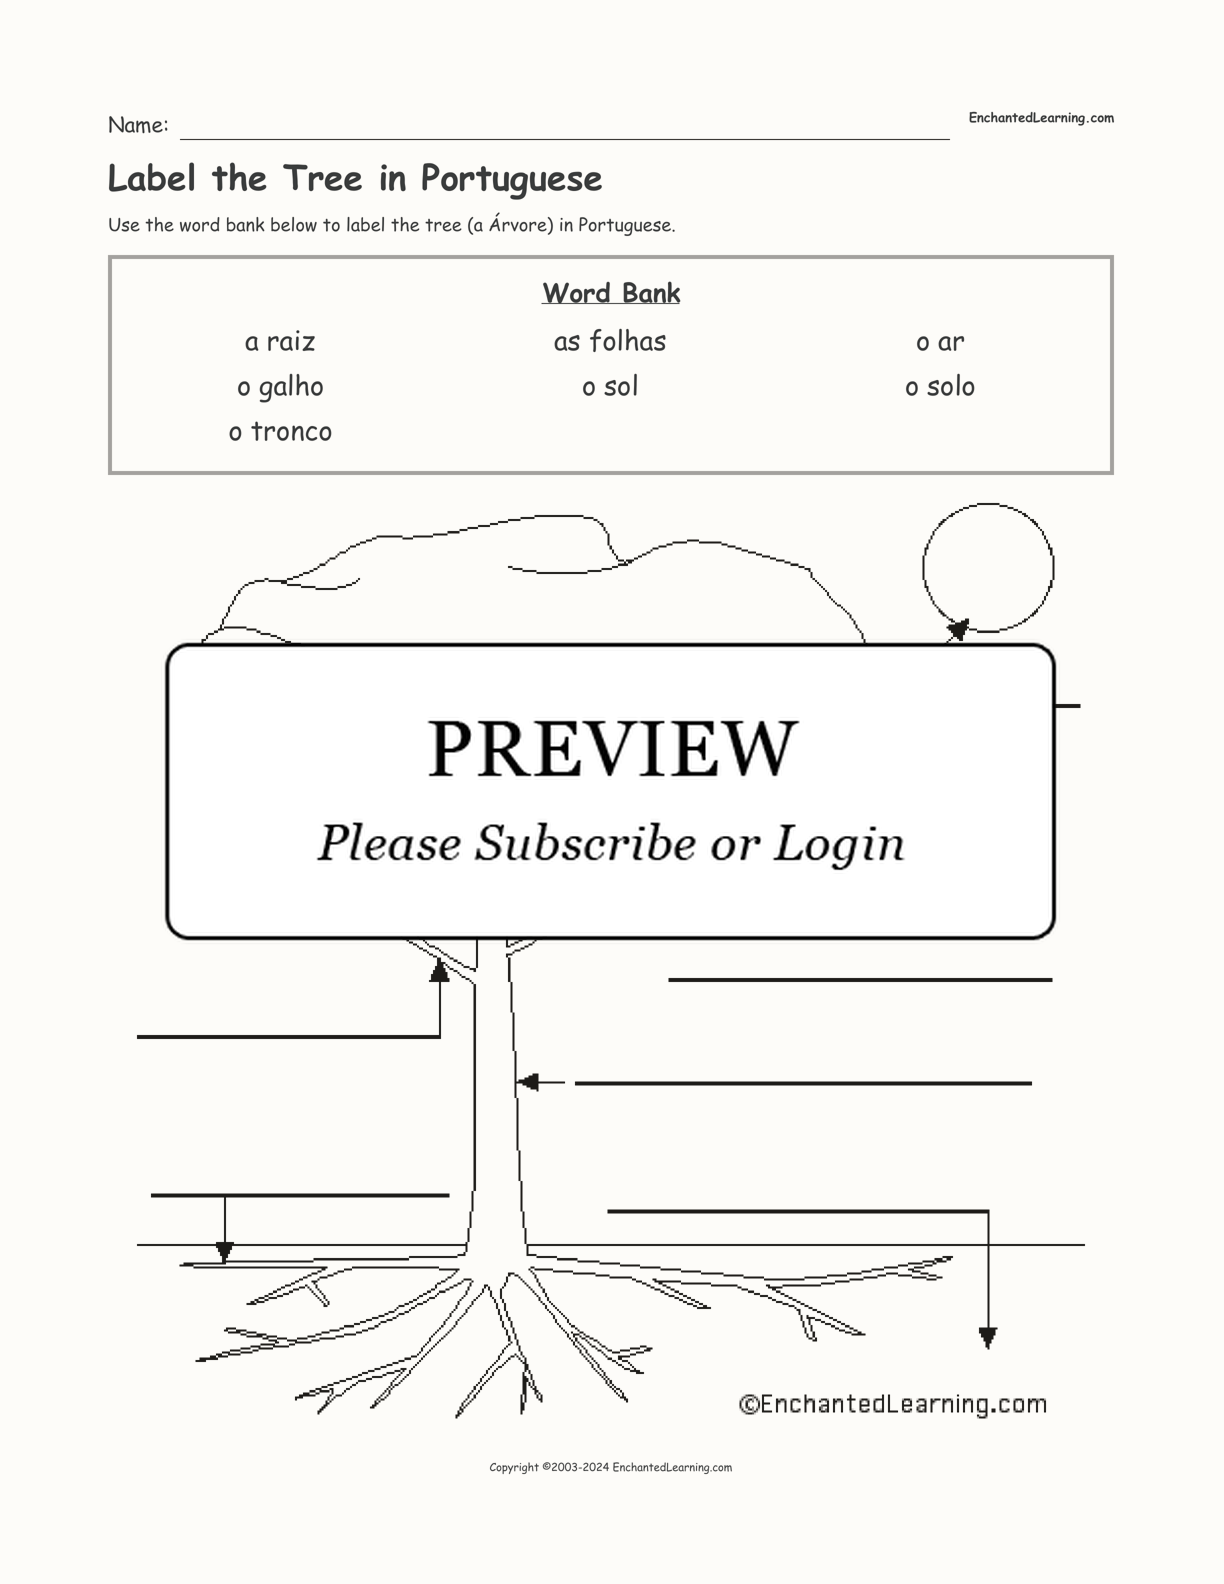 Label the Tree in Portuguese interactive worksheet page 1